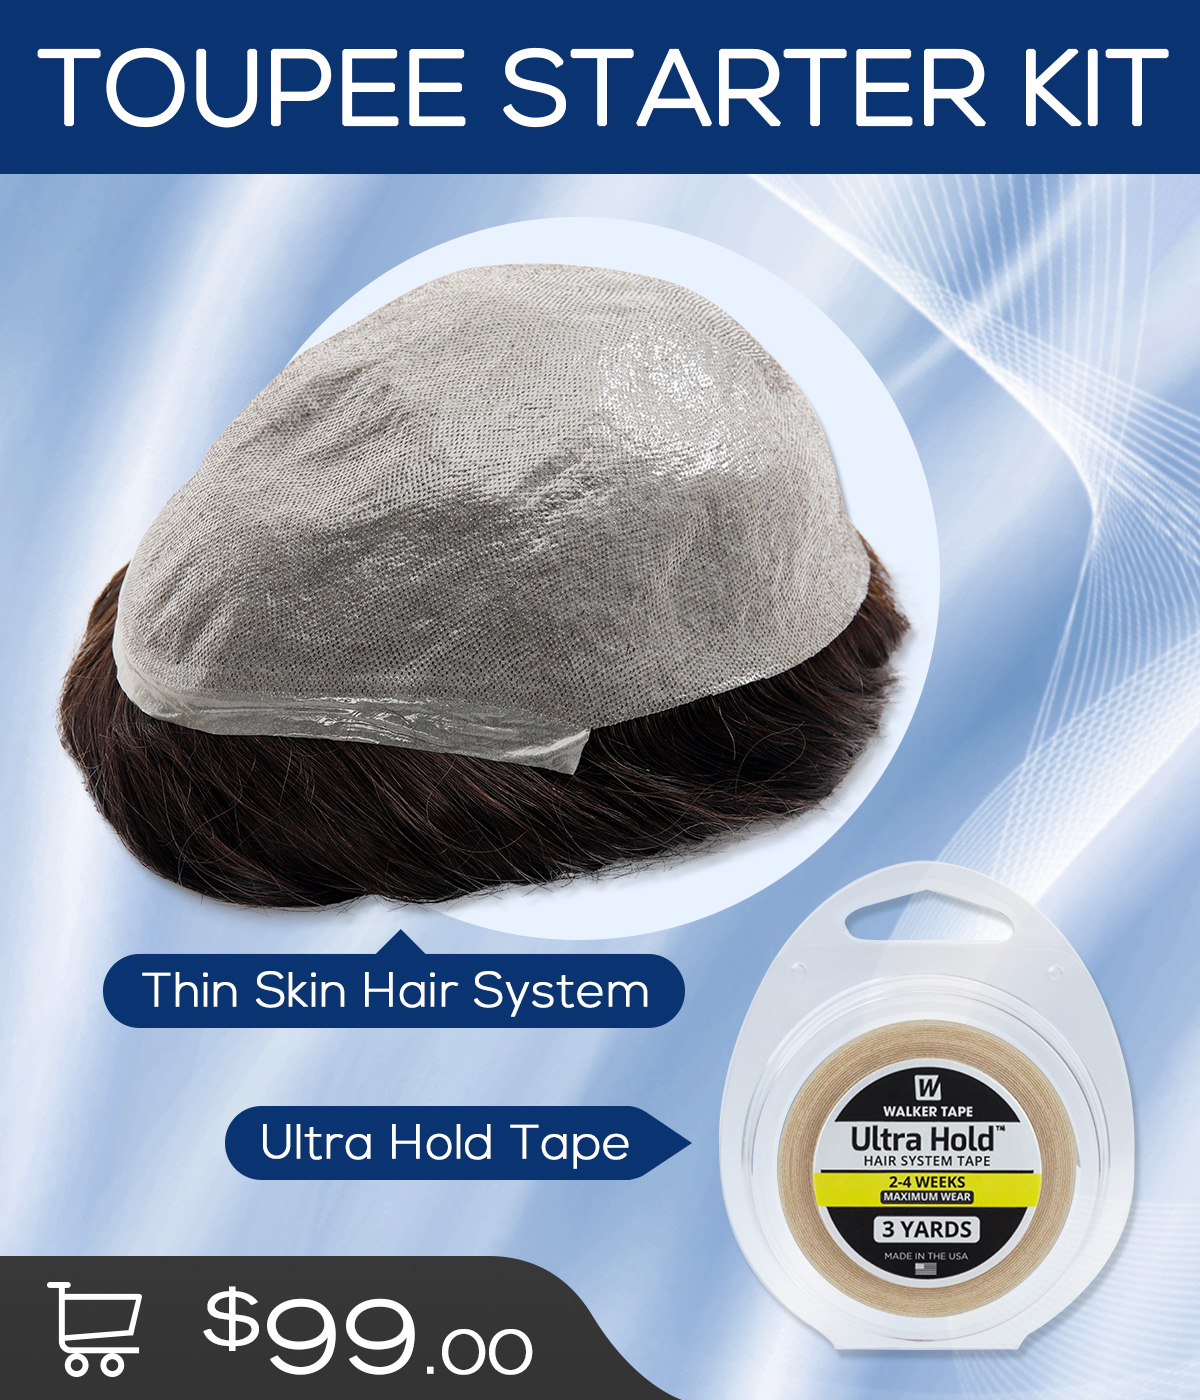 HAIR SYSTEM STARTER KIT PACKAGE I| THIN SKIN HAIR SYSTEM PLUS TOOLS